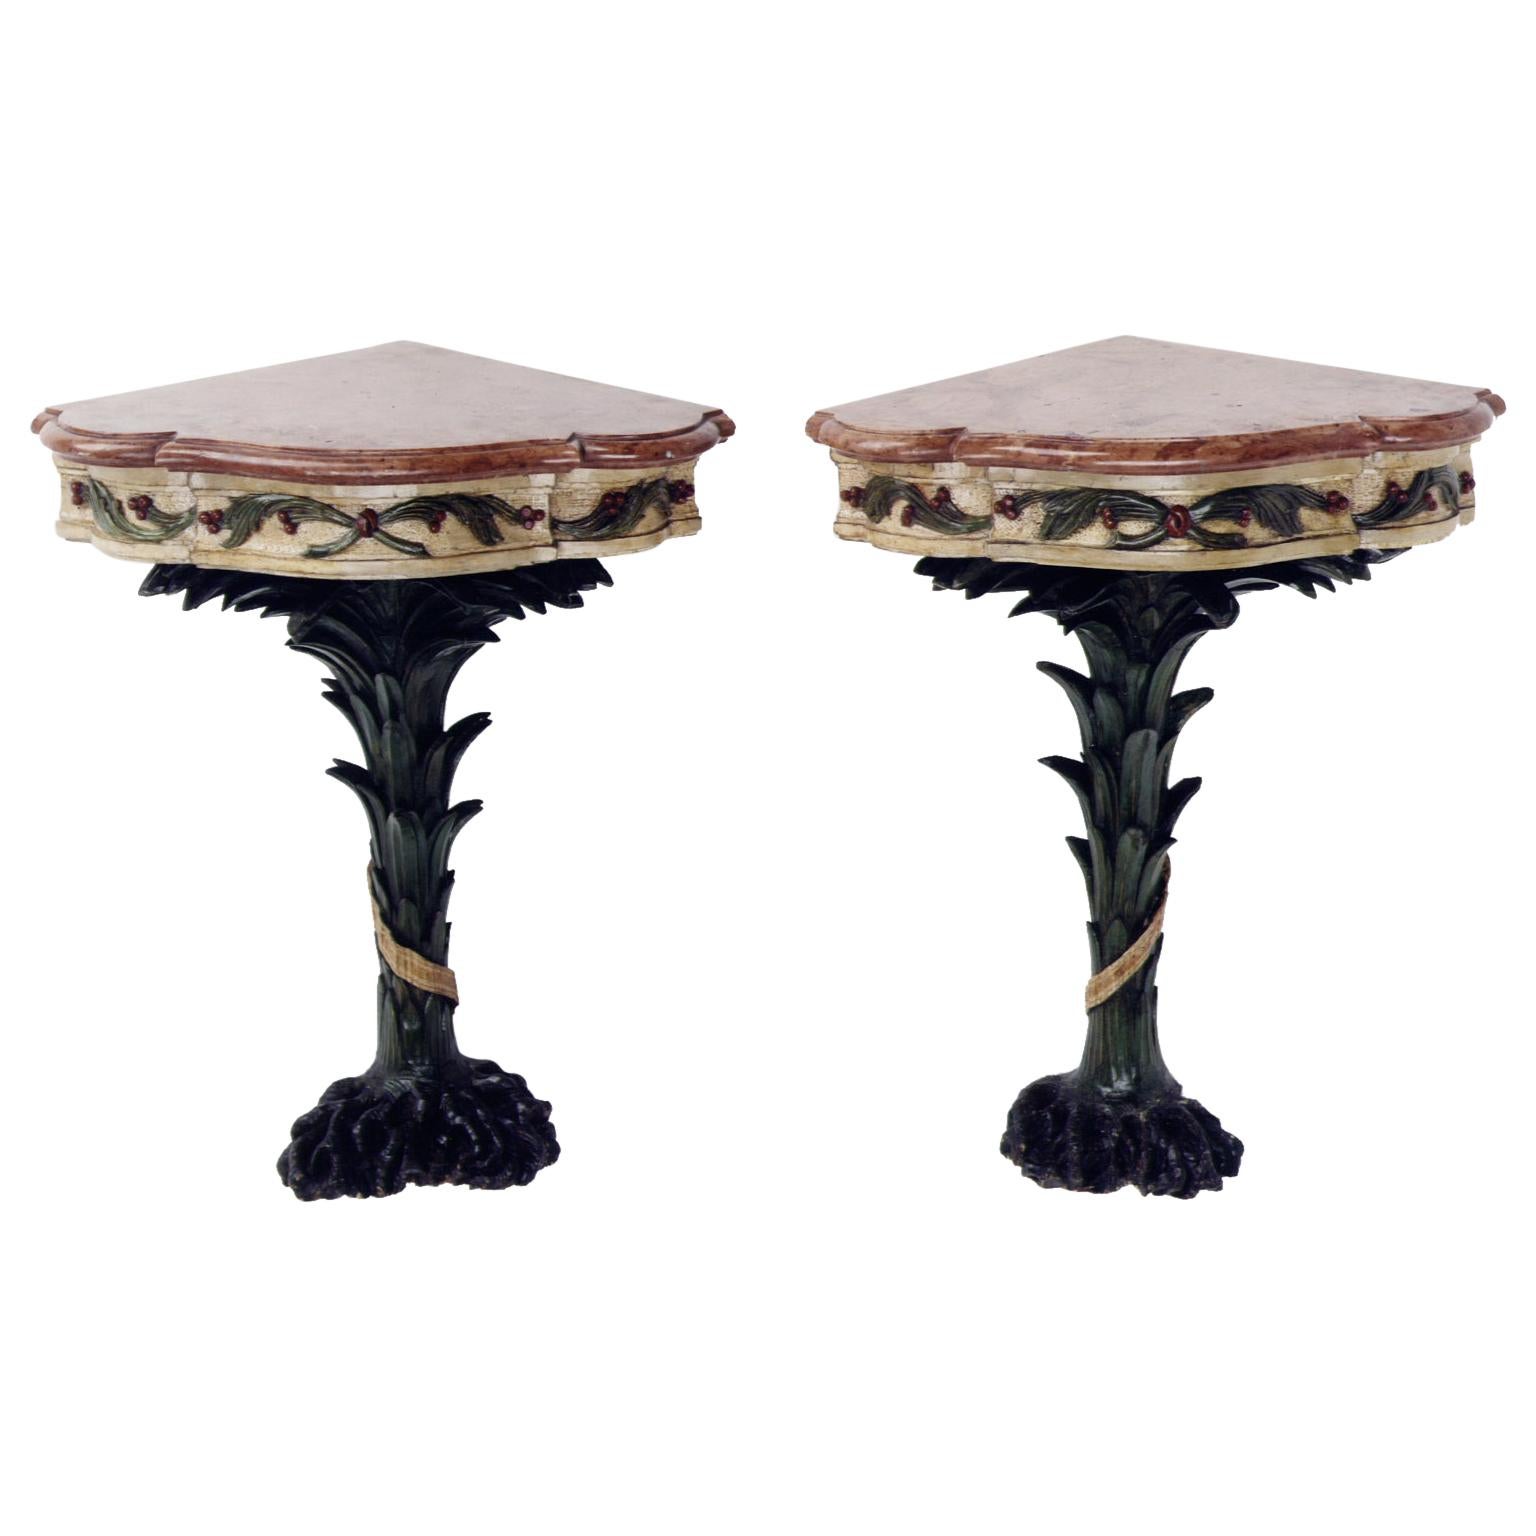 Venice Italy Mid-18th Century Pair of Corner Console Lacquered Wood Red Marble